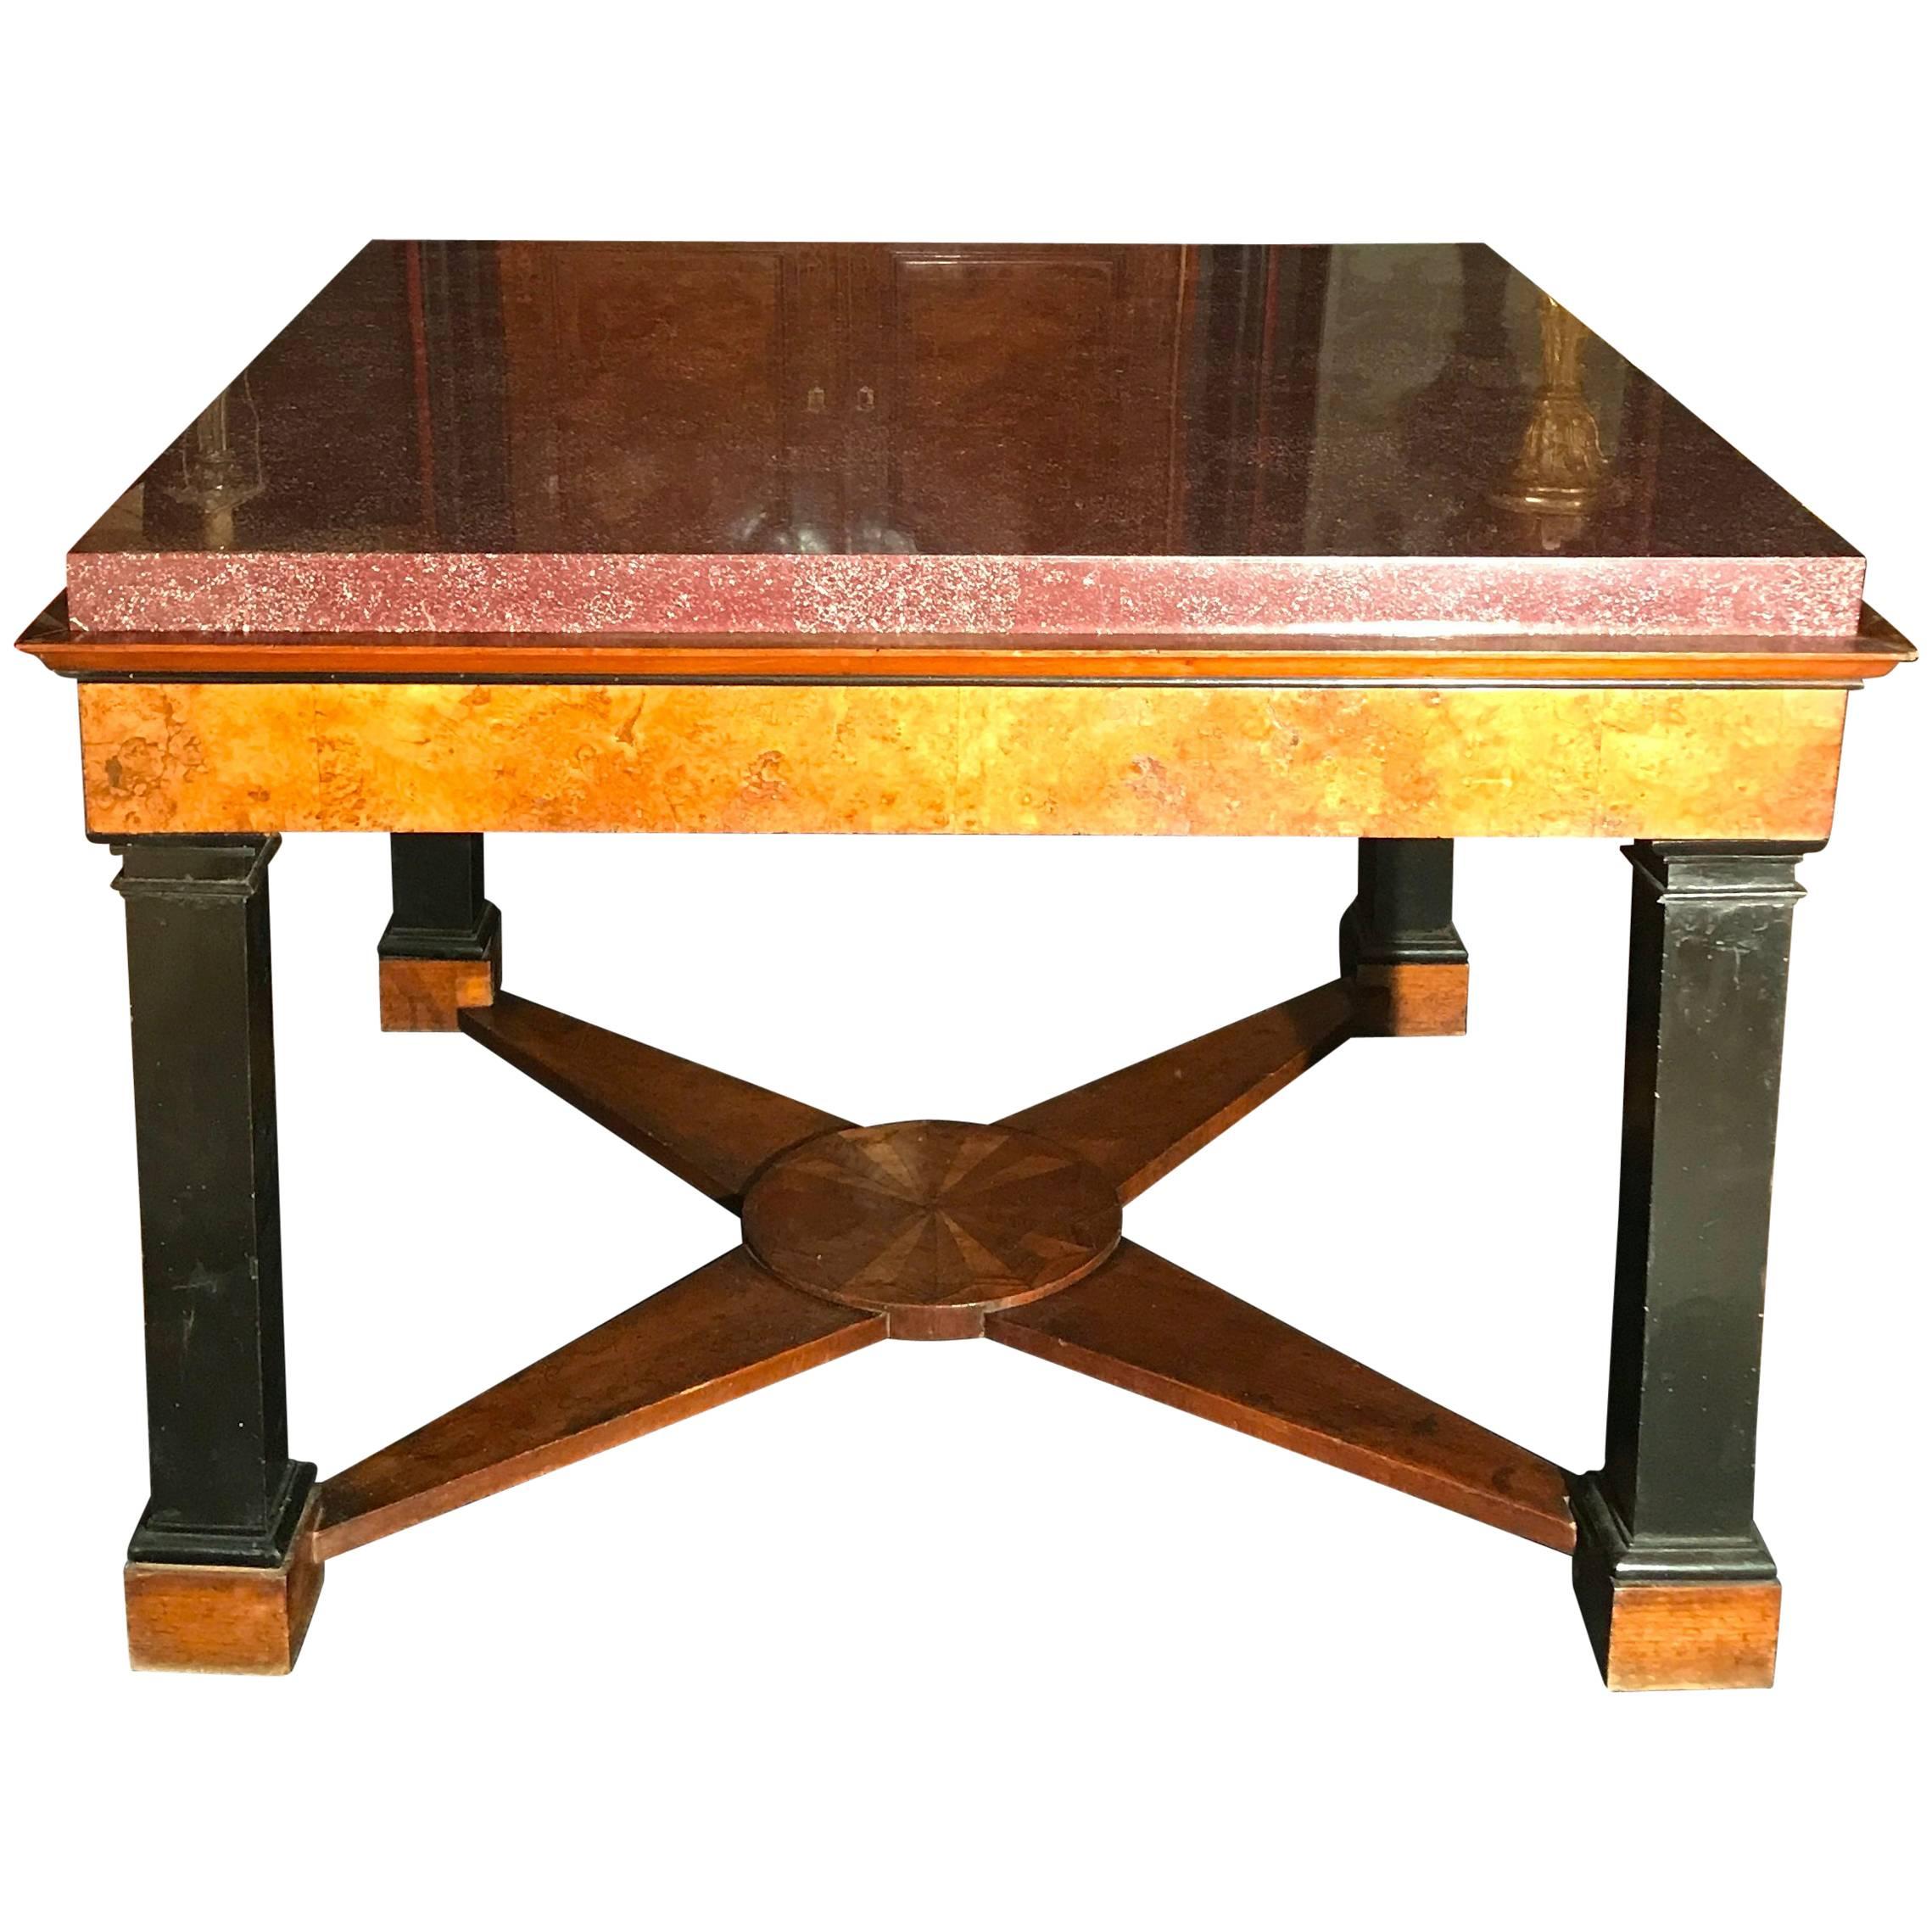 Important Italian Center Table with Imperial Porphyry Veneered Tabletop For Sale